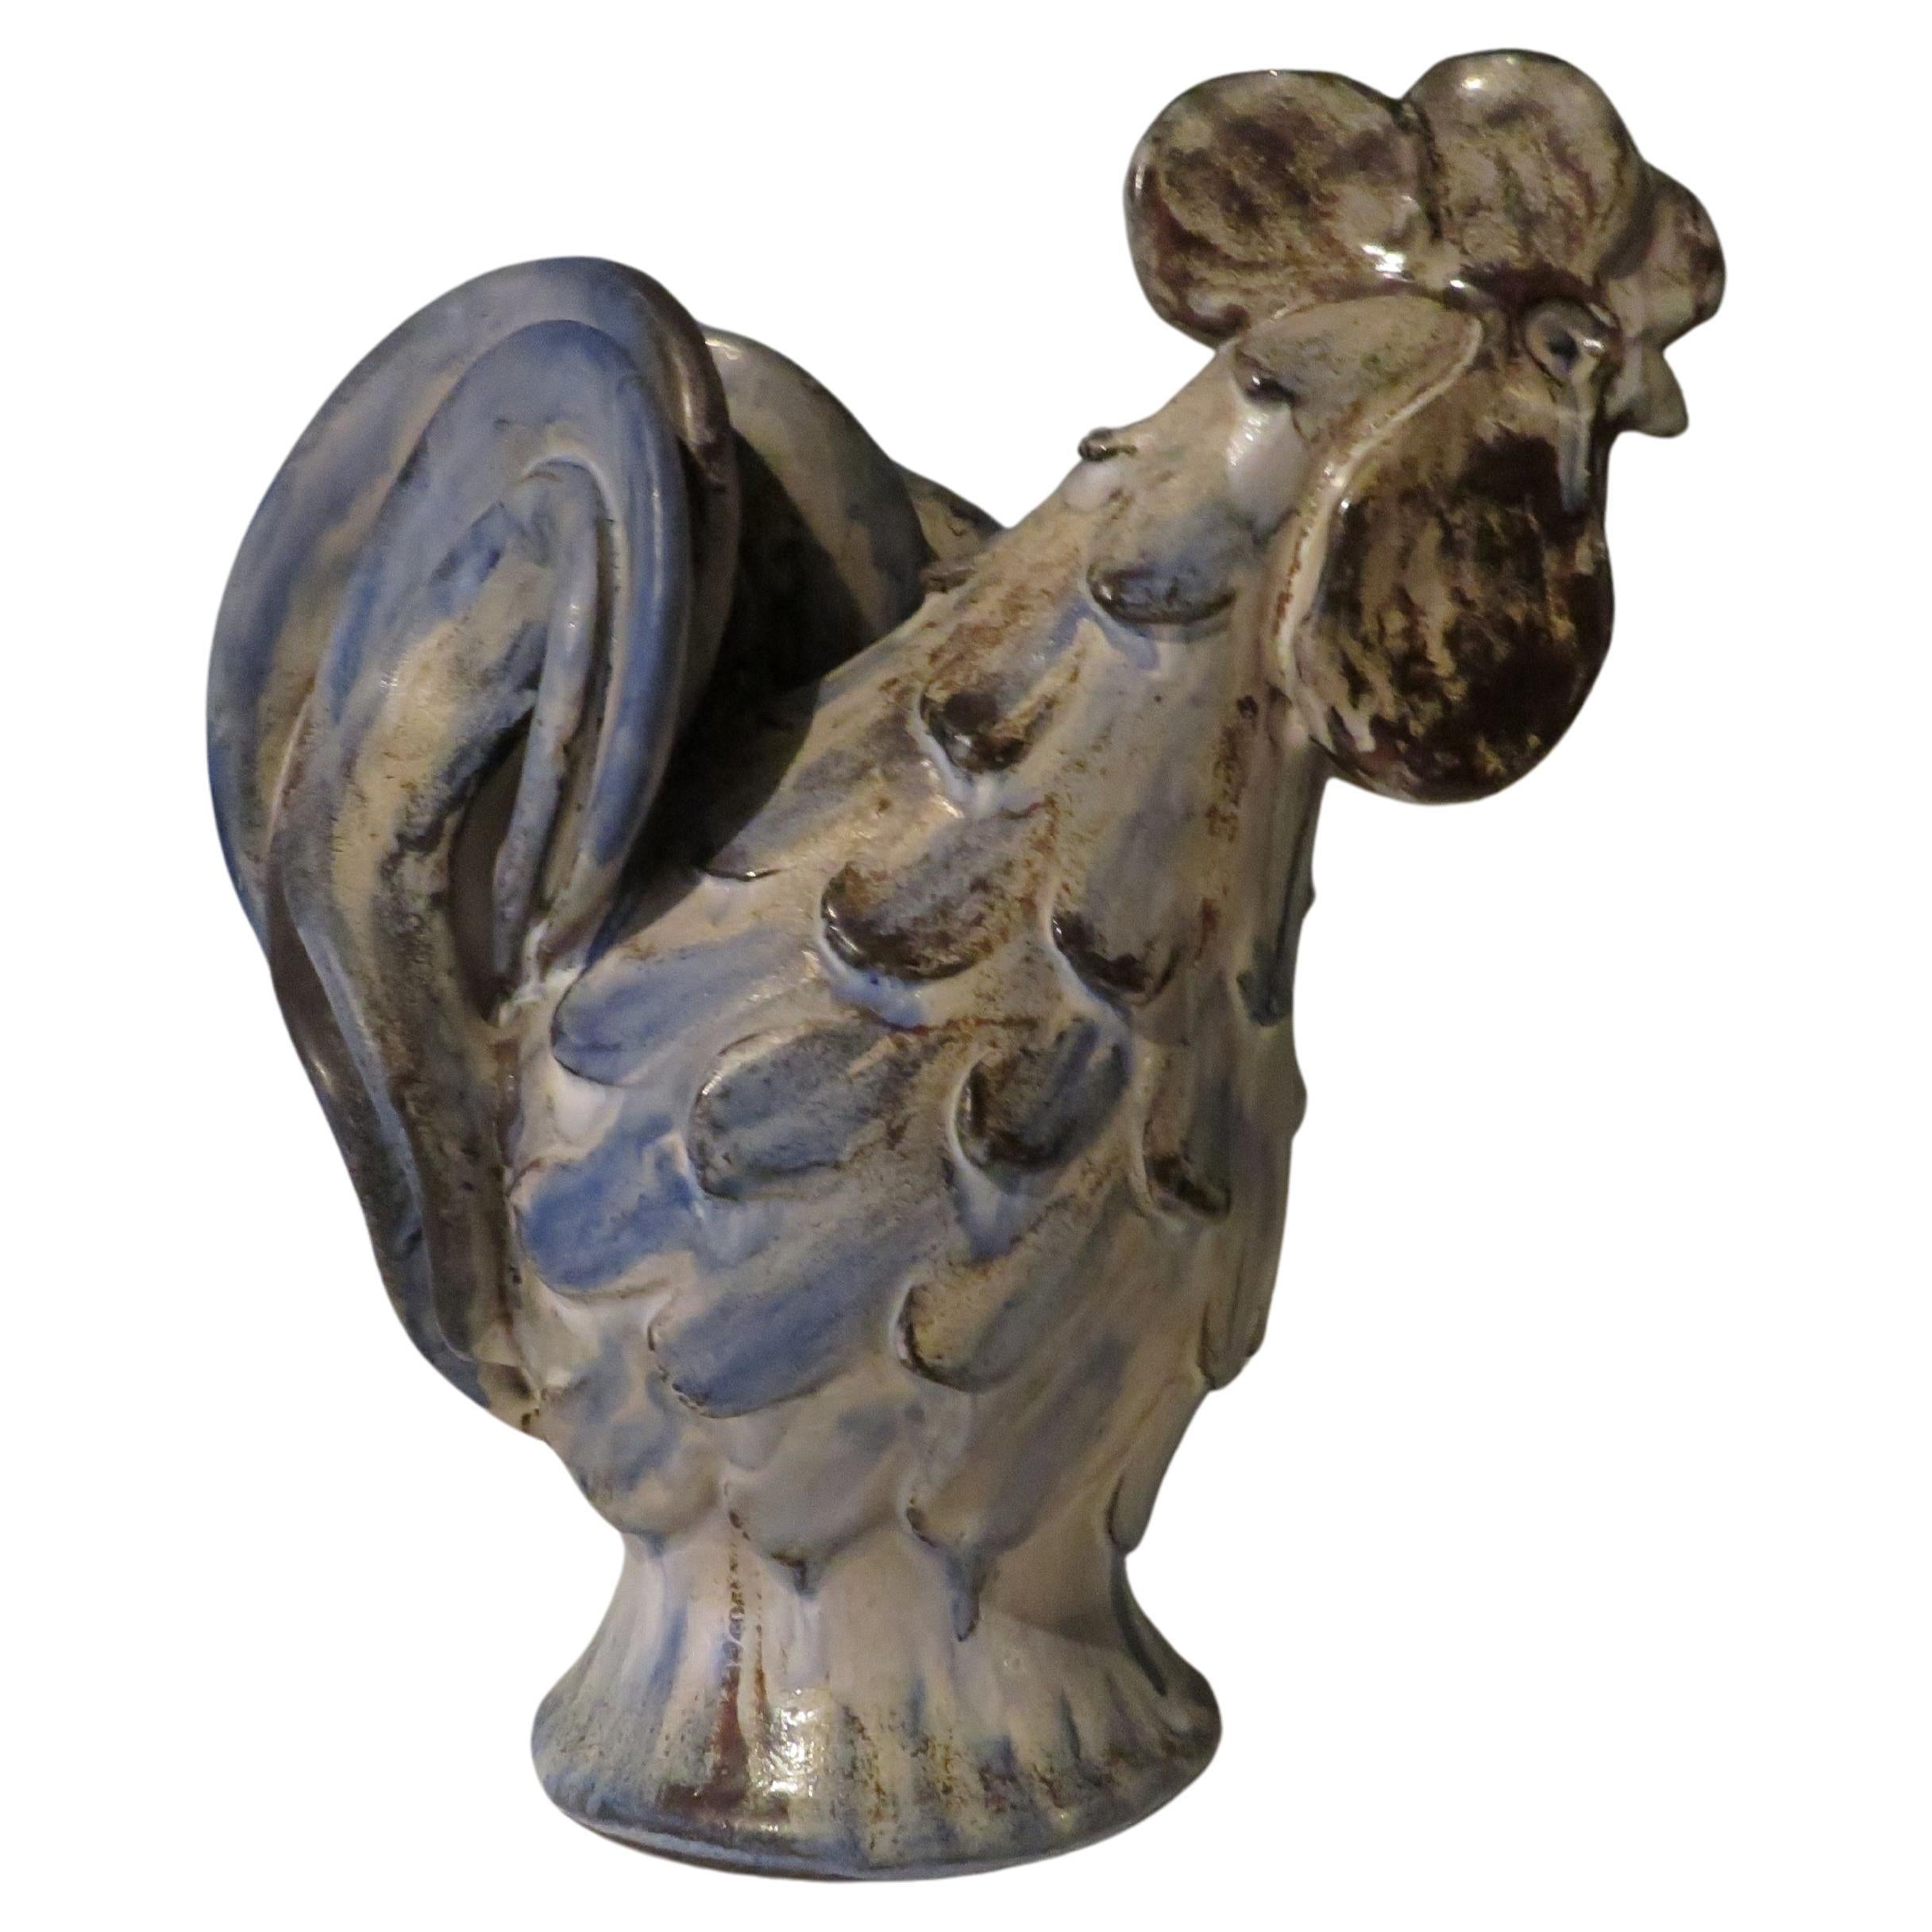 Attractive ceramic statue in ceramic with a matte glaze in blue-gray and brown tones.
The rooster was made by Viggo Kyhn for Kähler's ceramic factory in Denmark.
The statue is signed at the bottom and is in very good condition.
If there is no